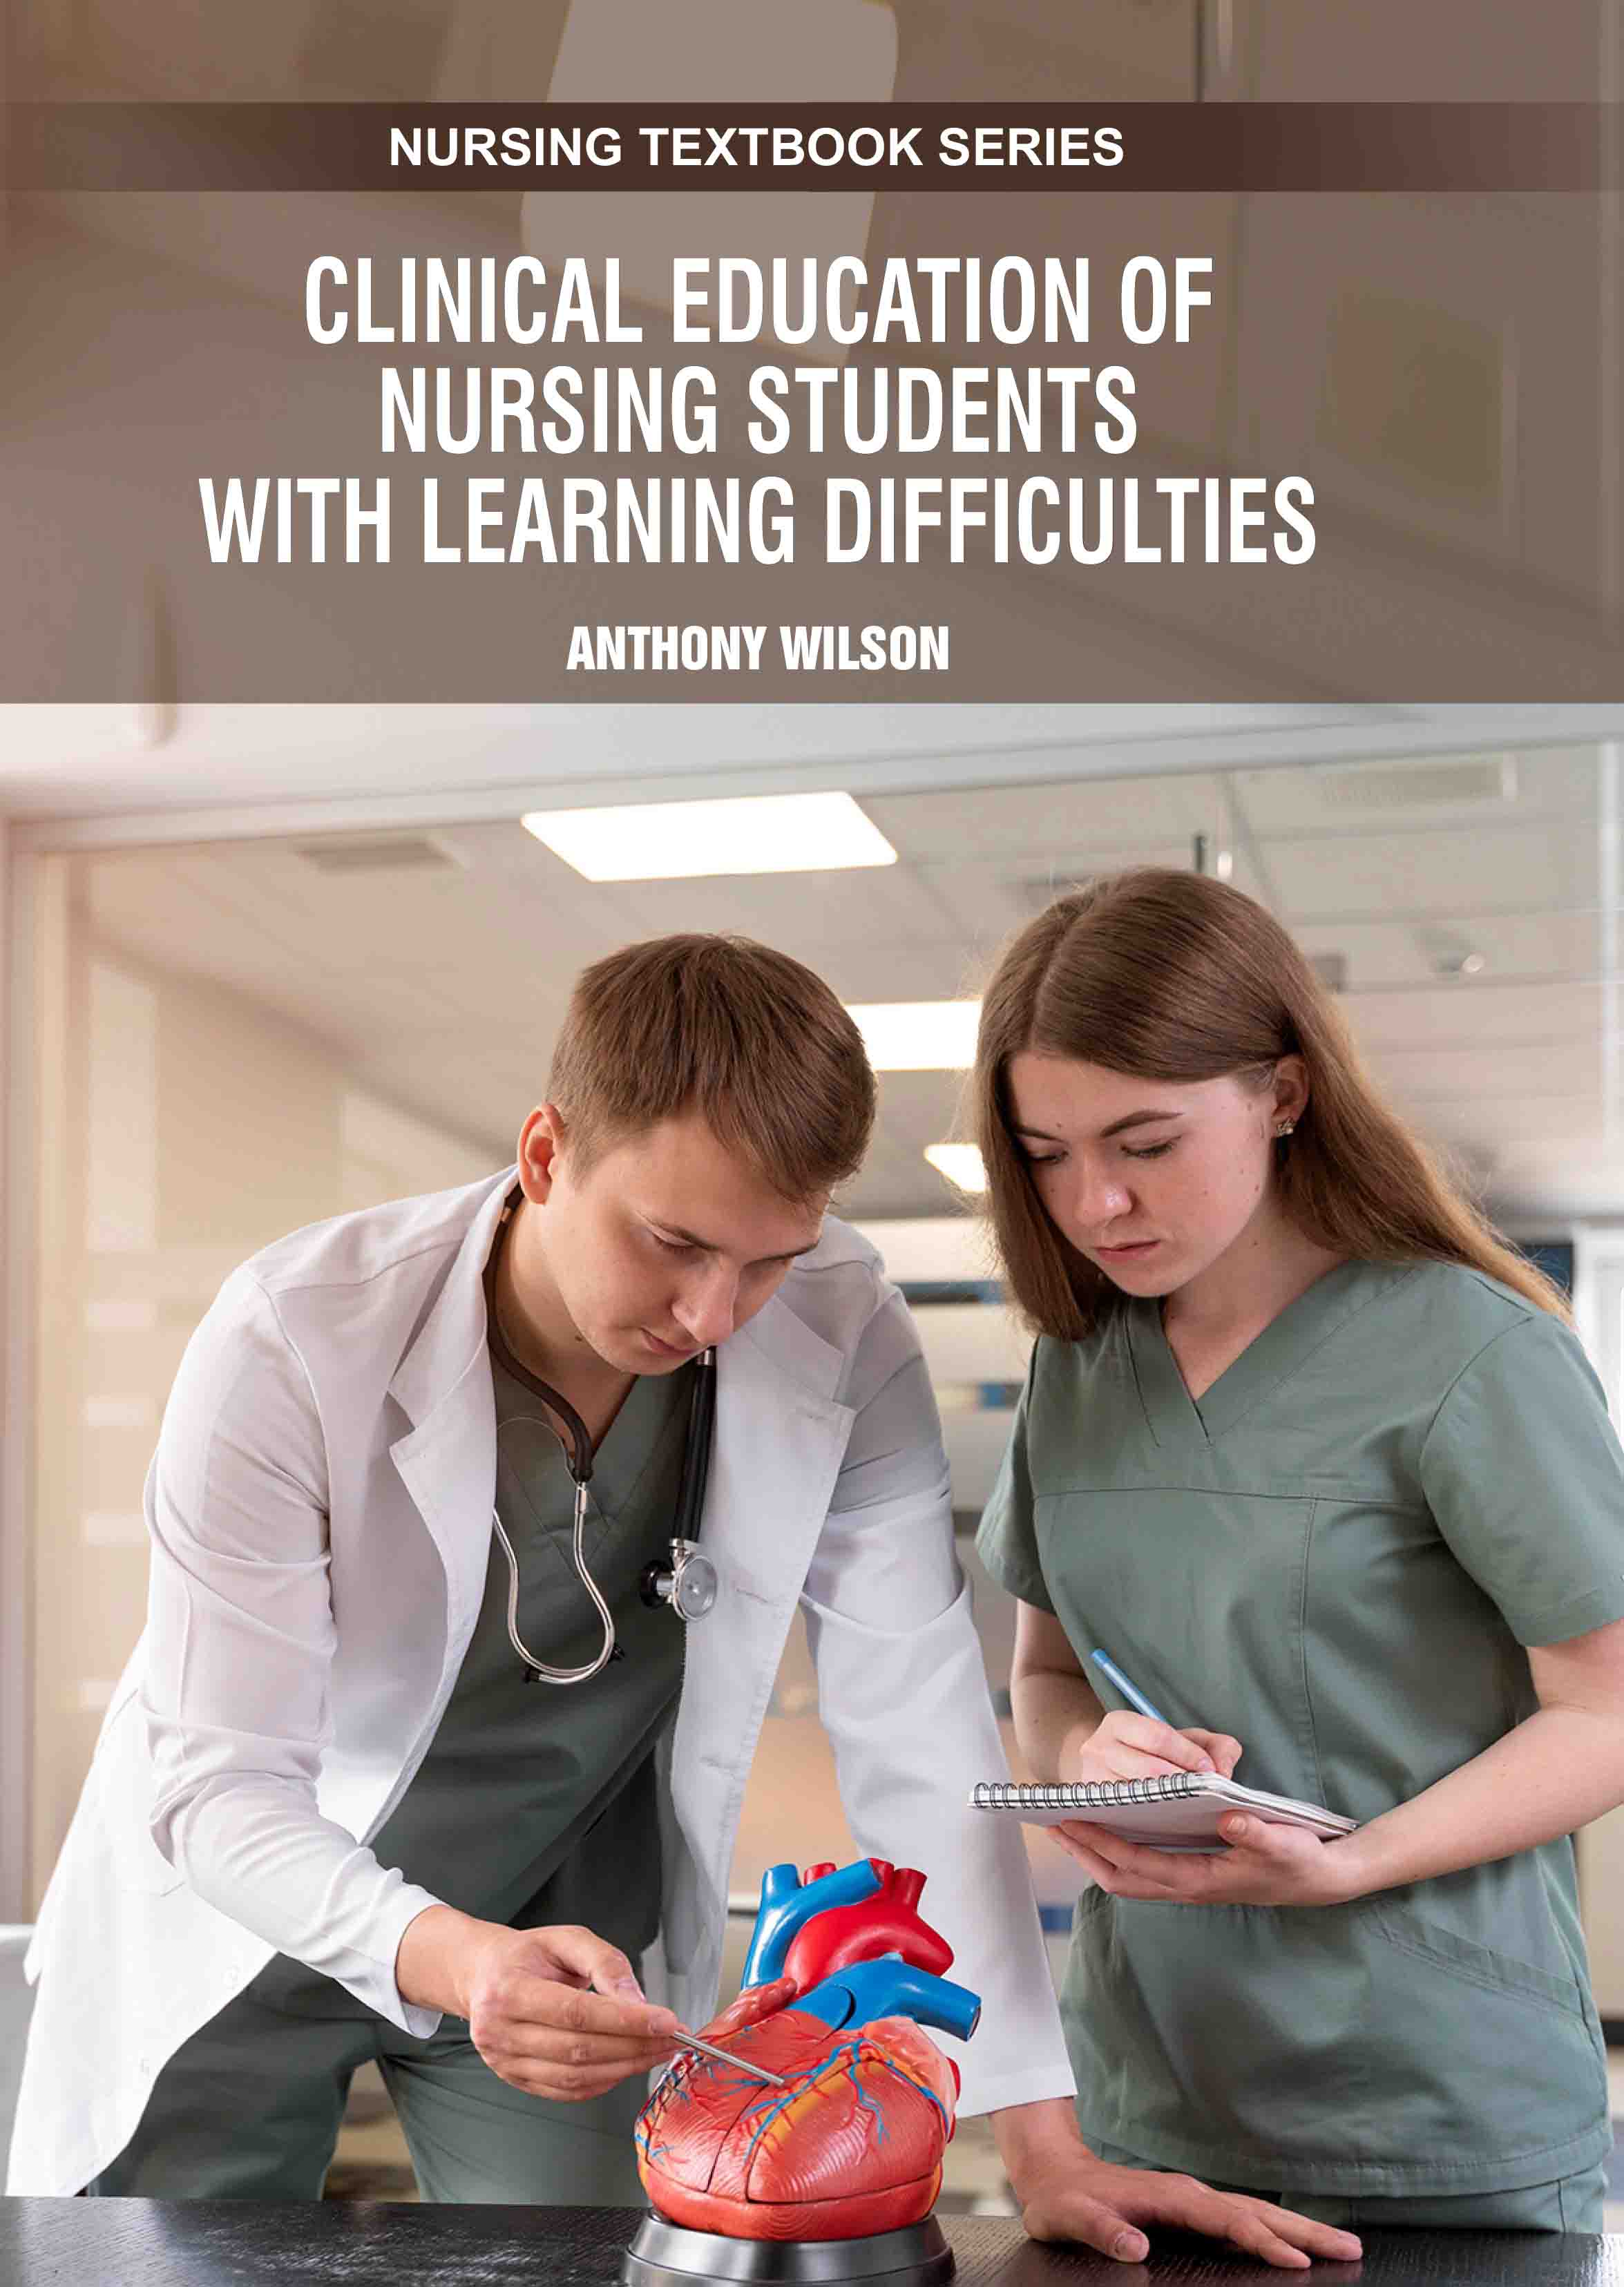 Clinical education of nursing students with learning difficulties